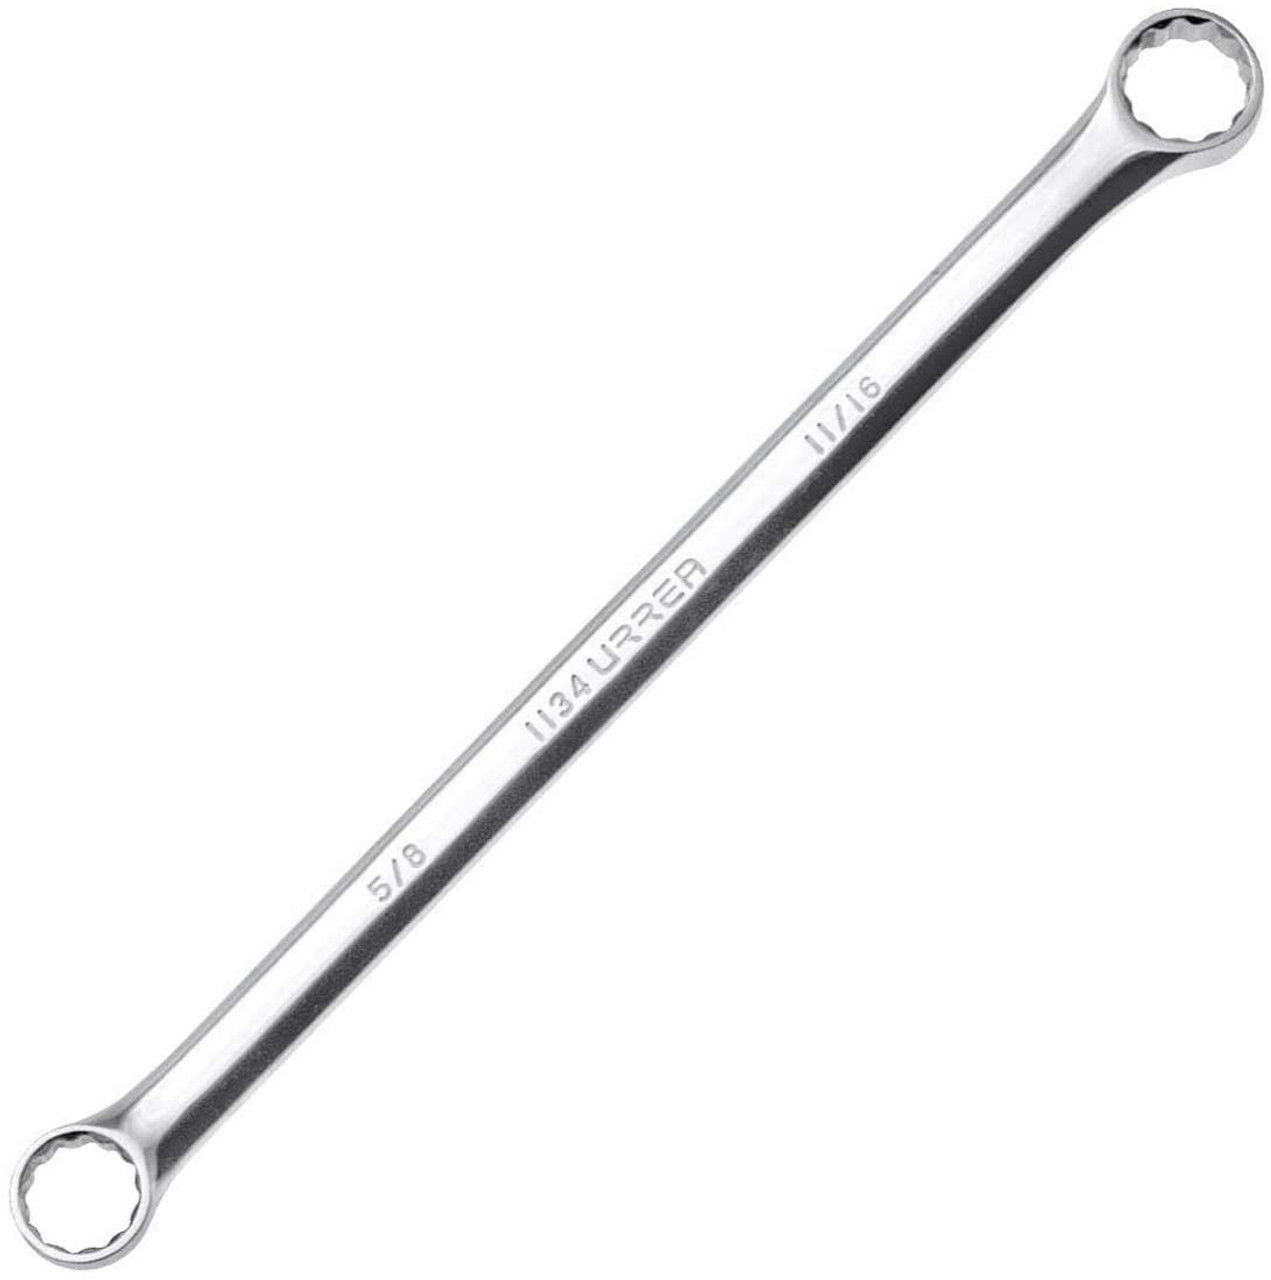 Full polished  15 Degree Box-End wrench, Size: 15/16x 1,12 Point , Total Length: 15-1/2"